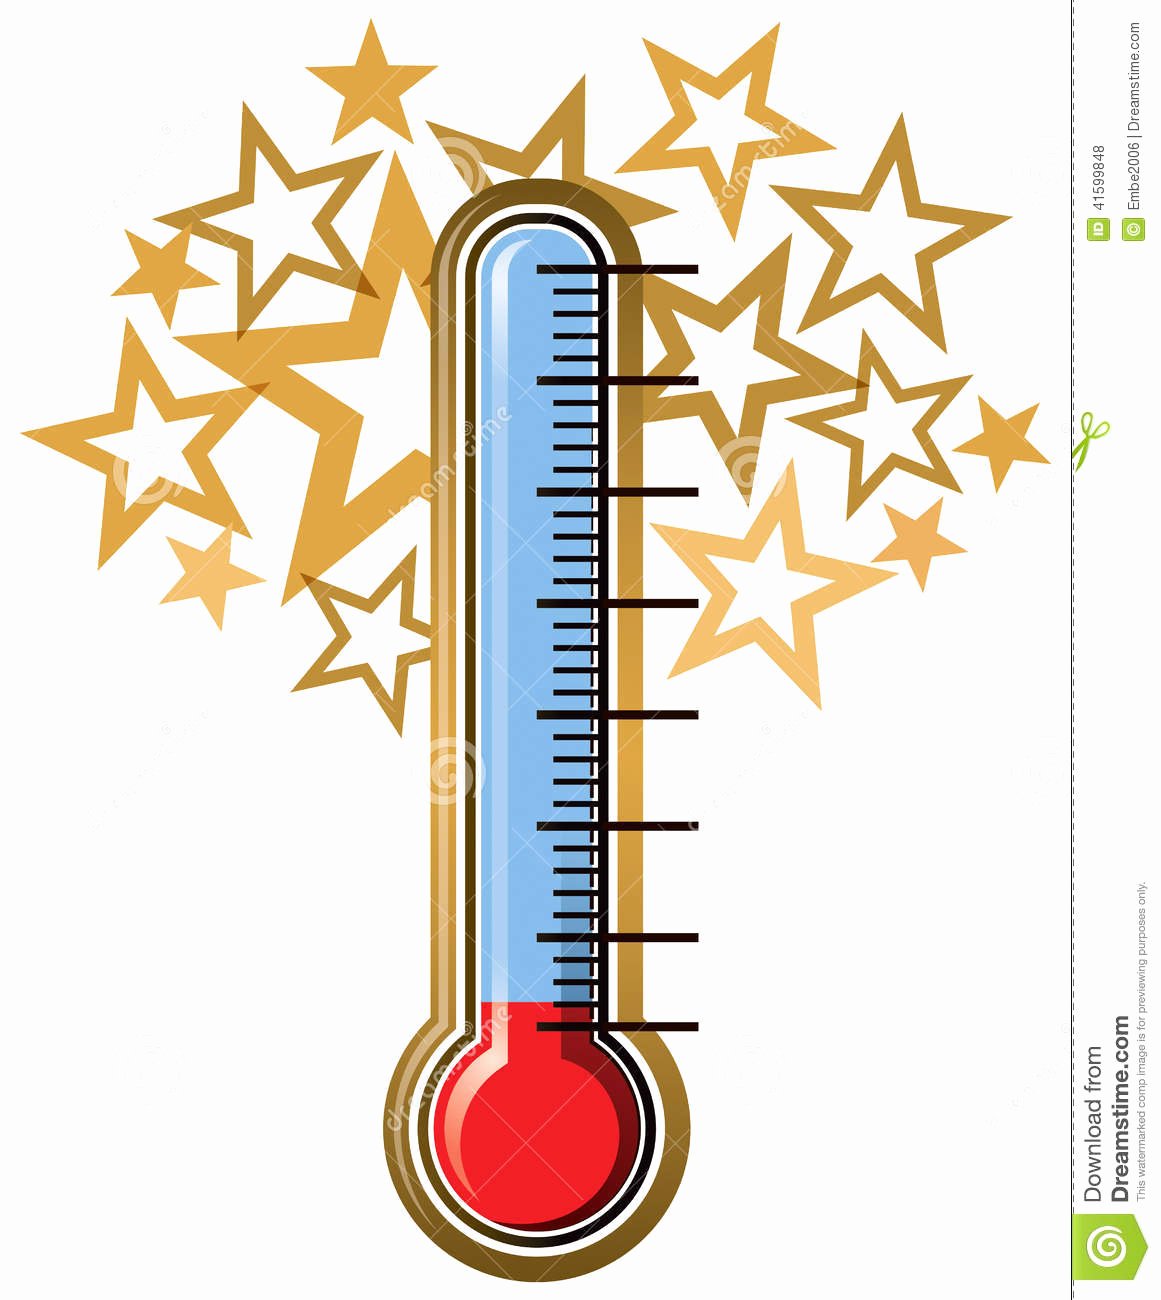 Fundraising thermometer Template Editable Awesome Blank thermometer